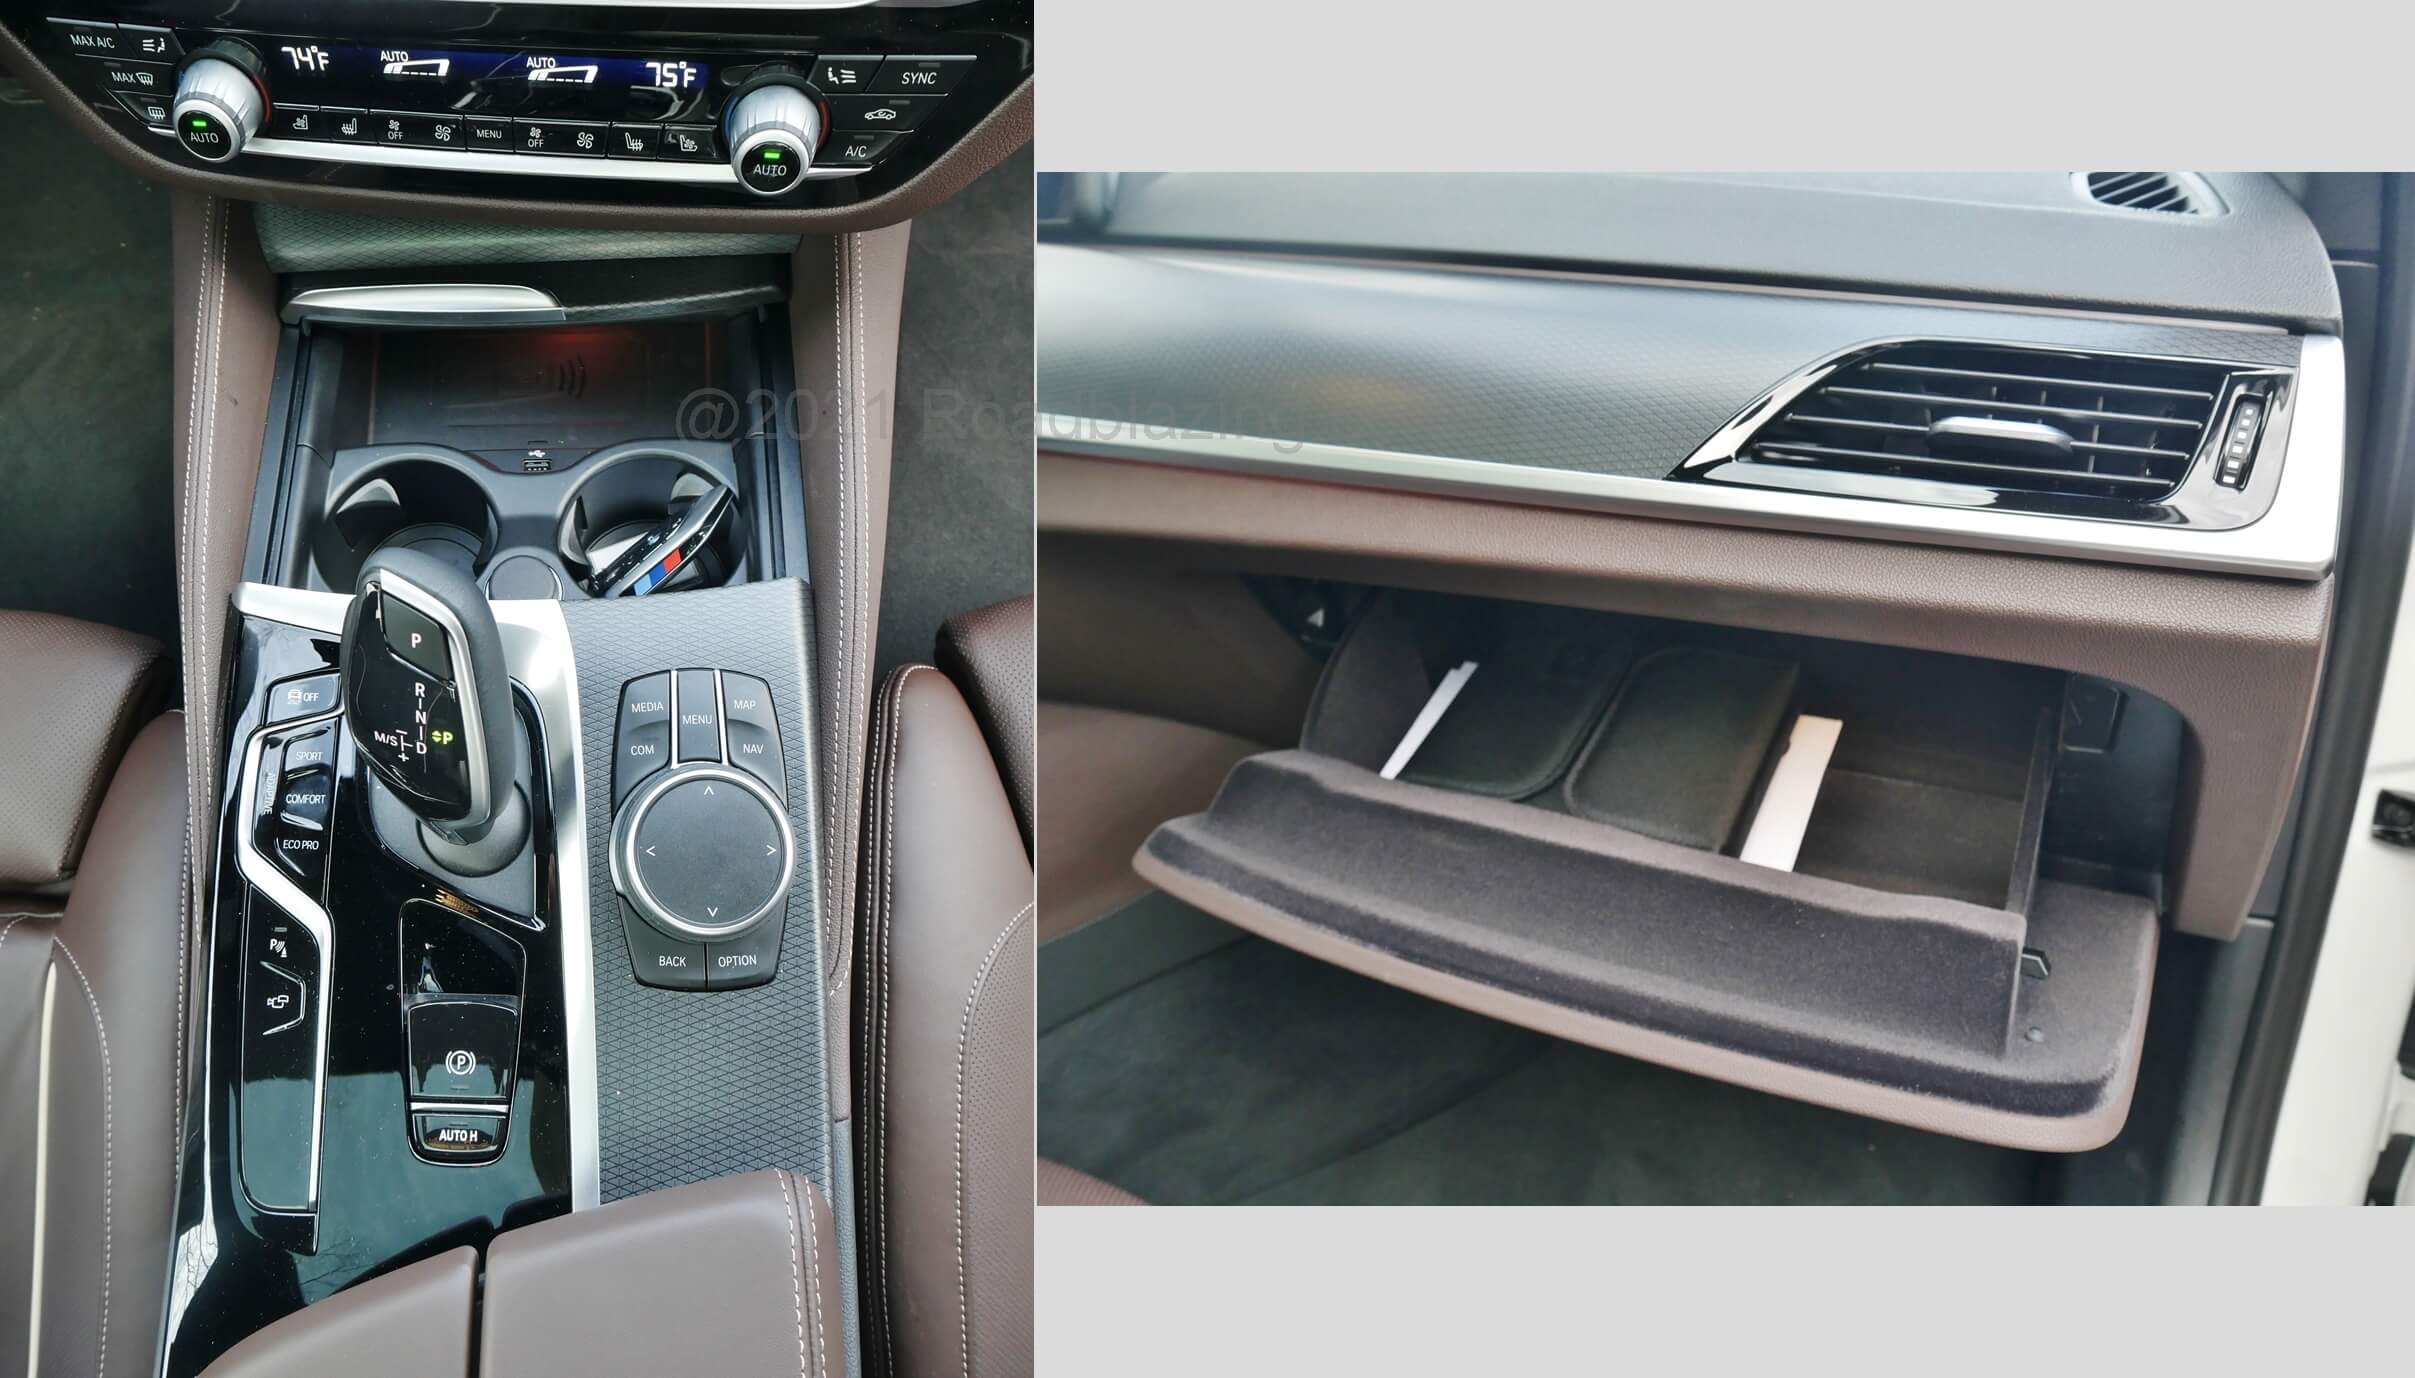 2021 BMW 540i xDrive: center console controls include by wire joystick shifter, Qi inductive wireless device charging; Felt lined glove box adds content management tray